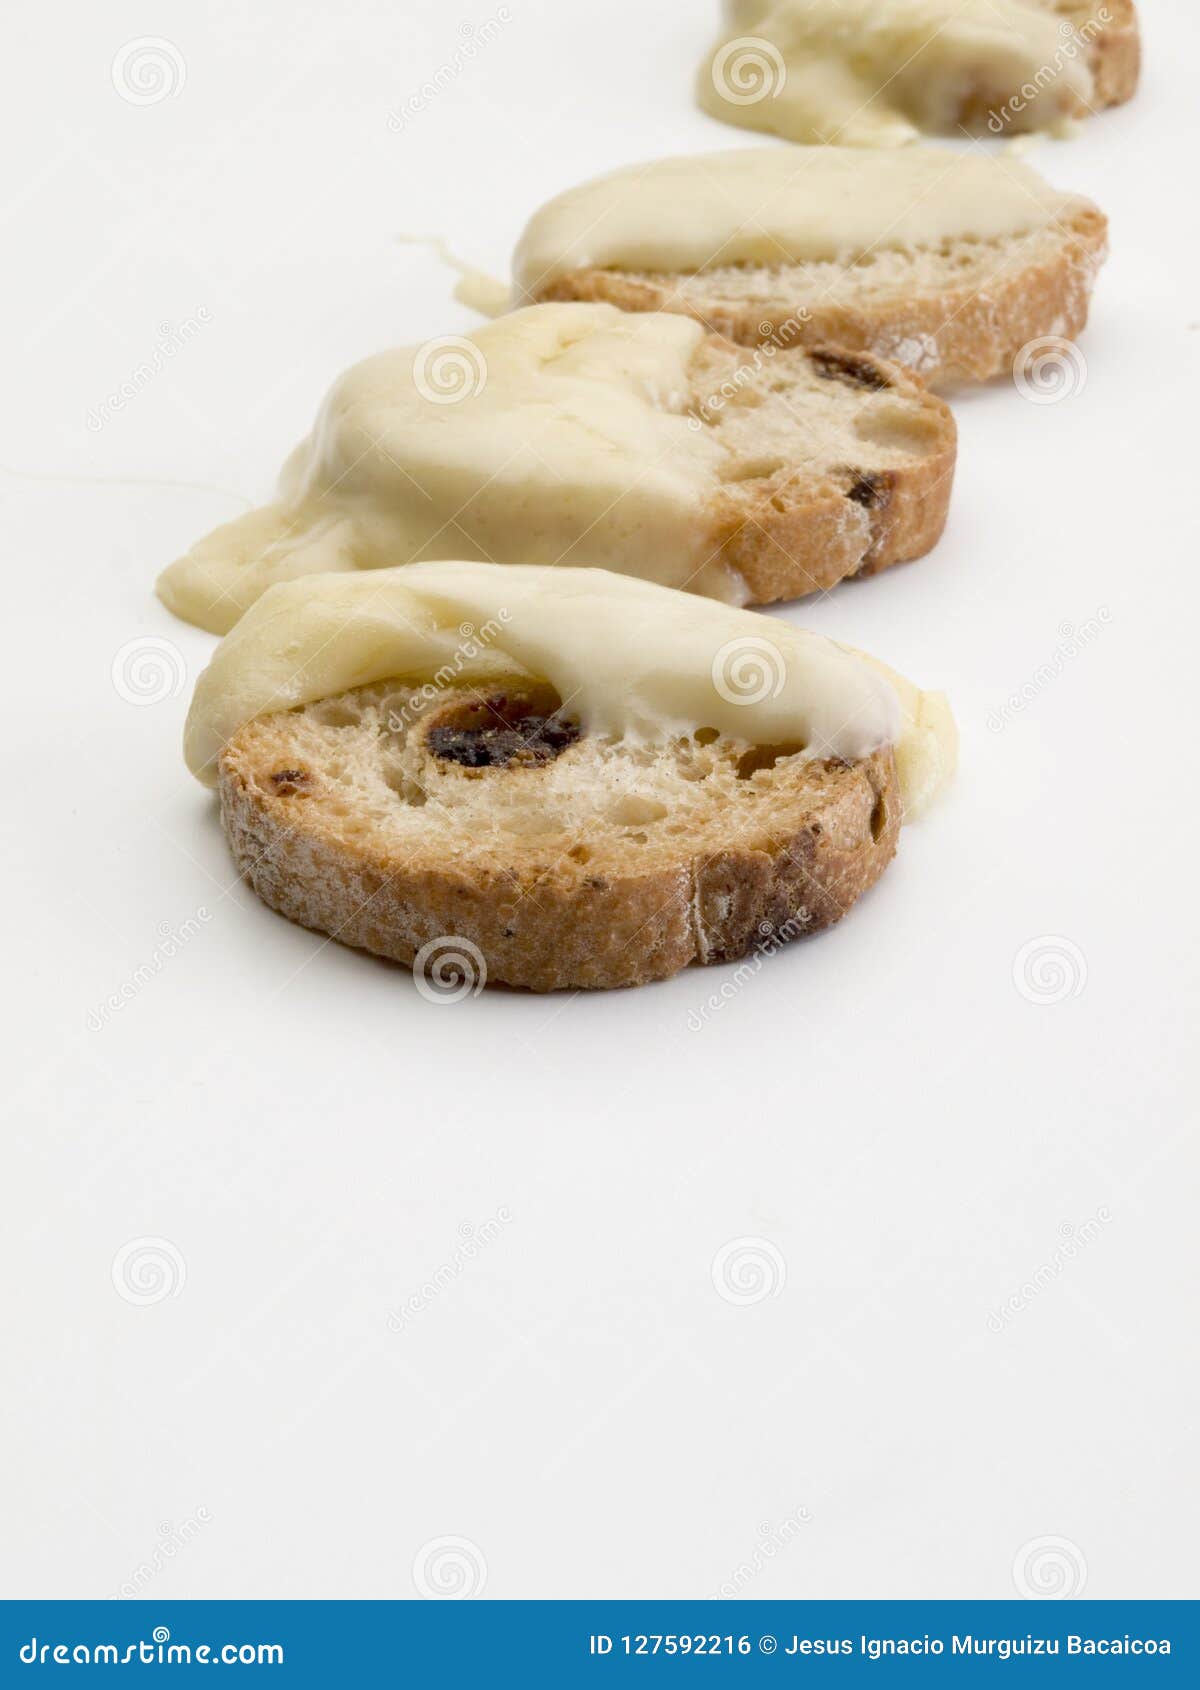 detail of four bread toast with raisins and melted cheese